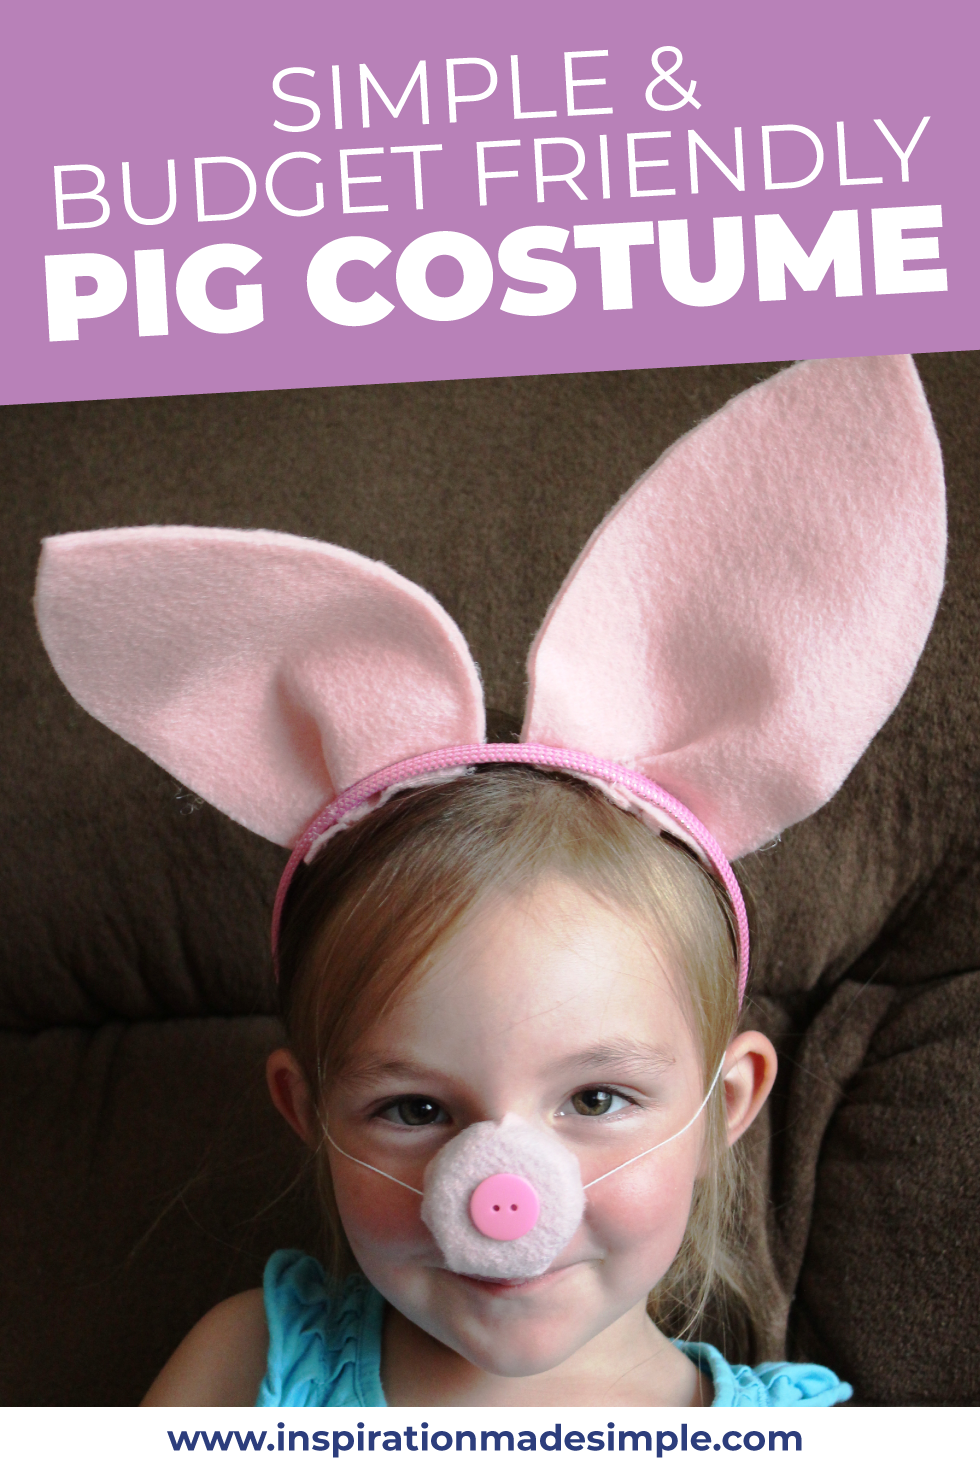 Simple and budget friendly Pig Costume Tutorial